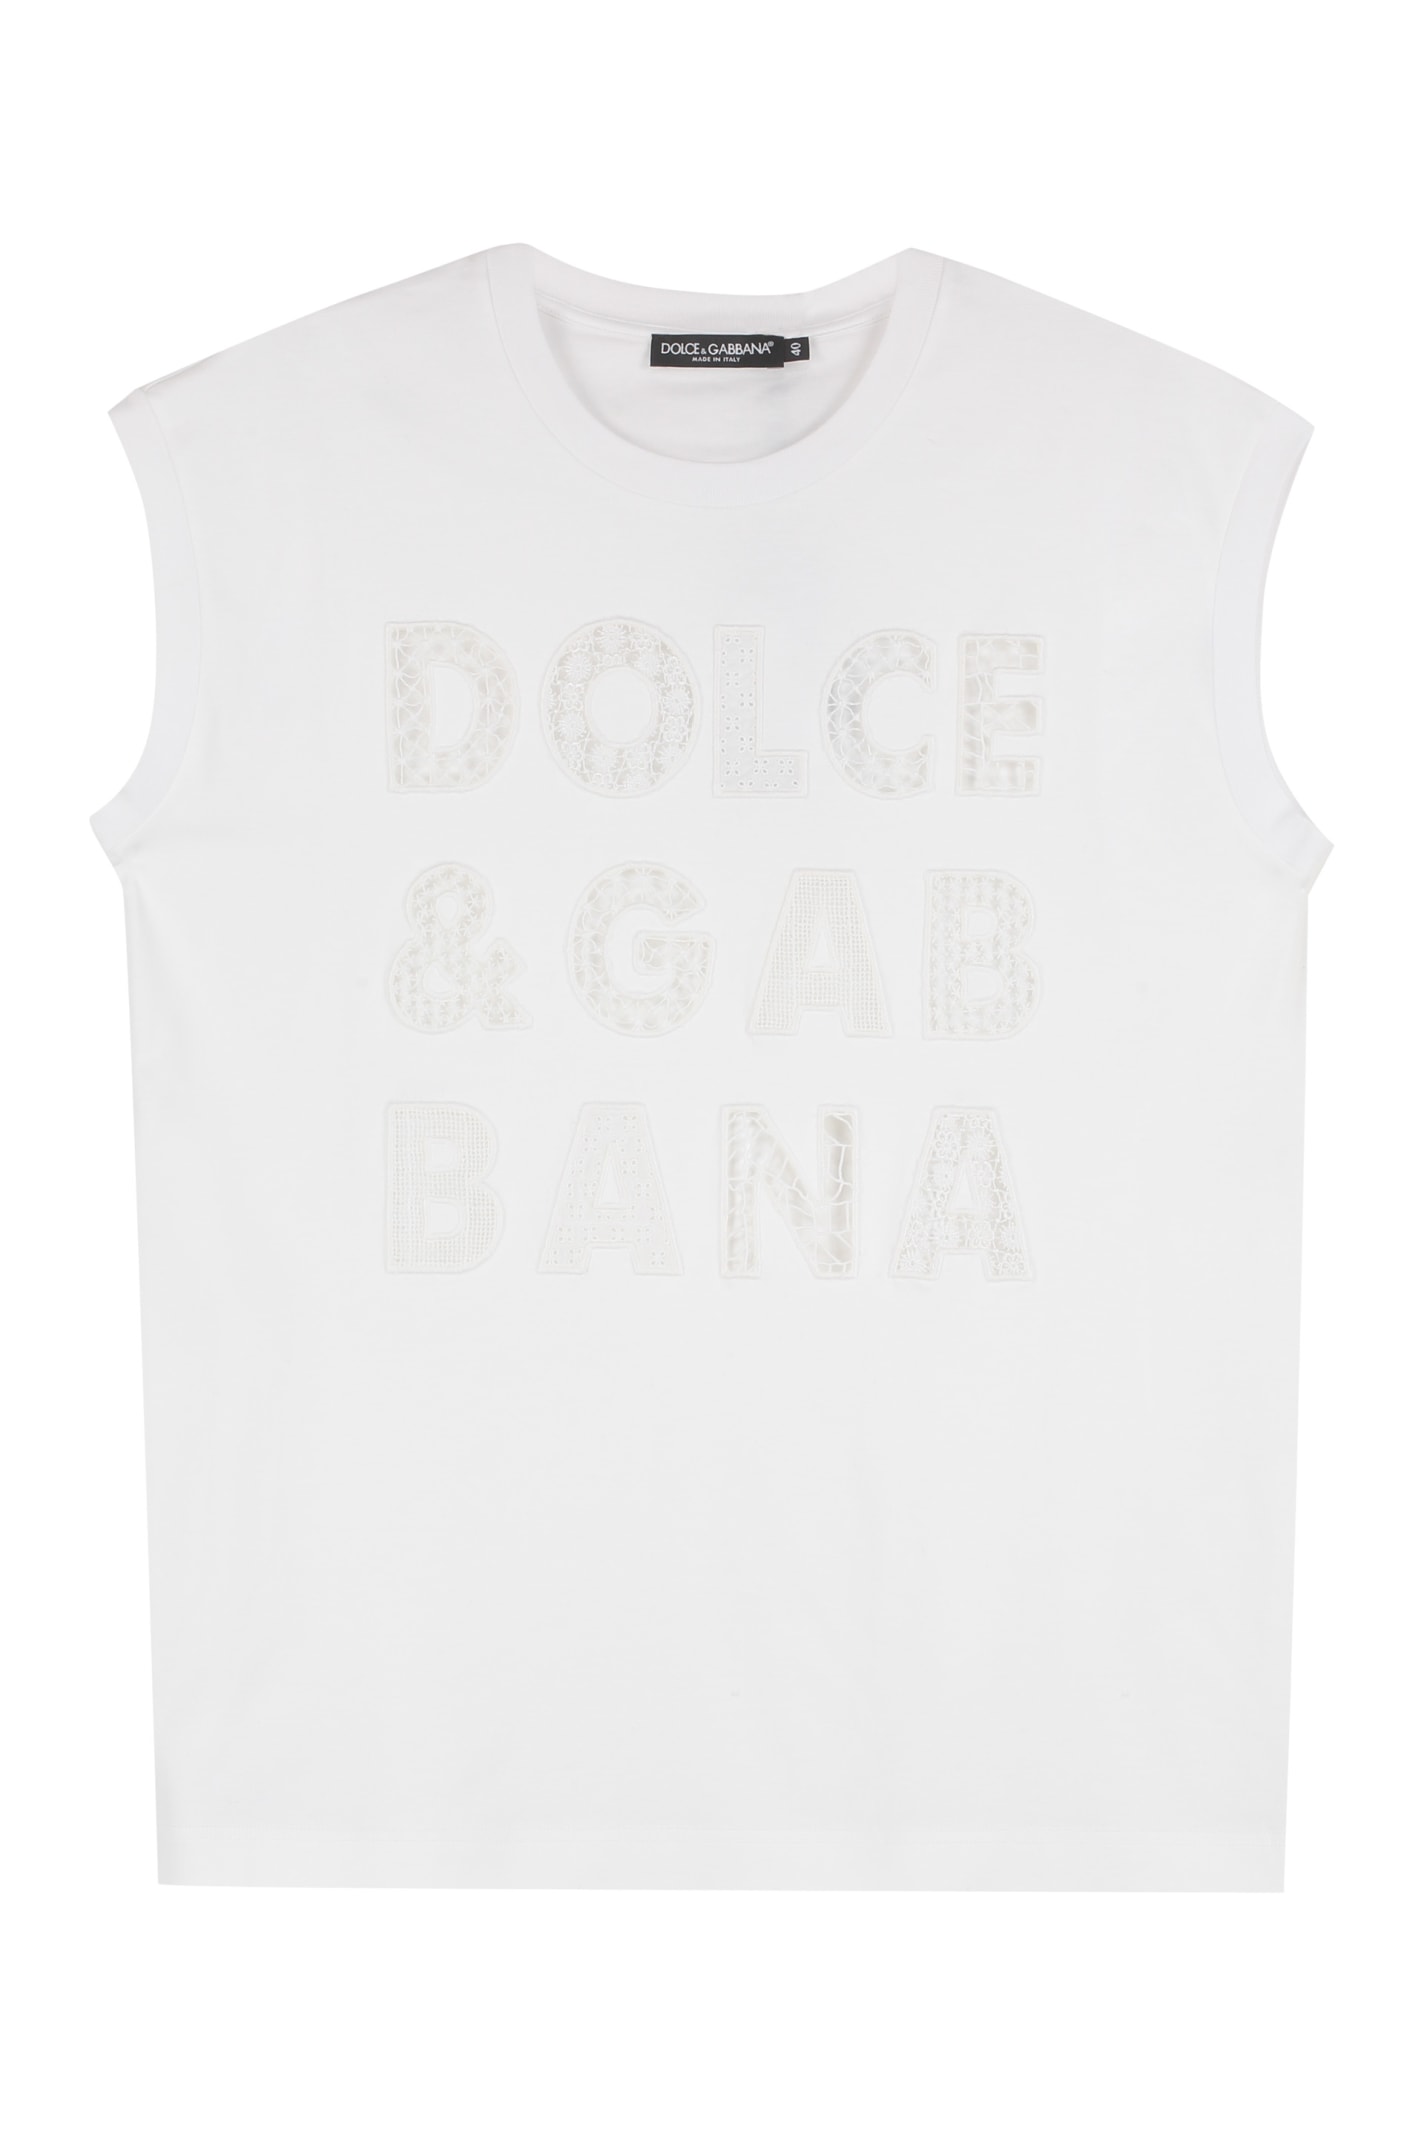 Dolce & Gabbana Embroidered Cotton Top